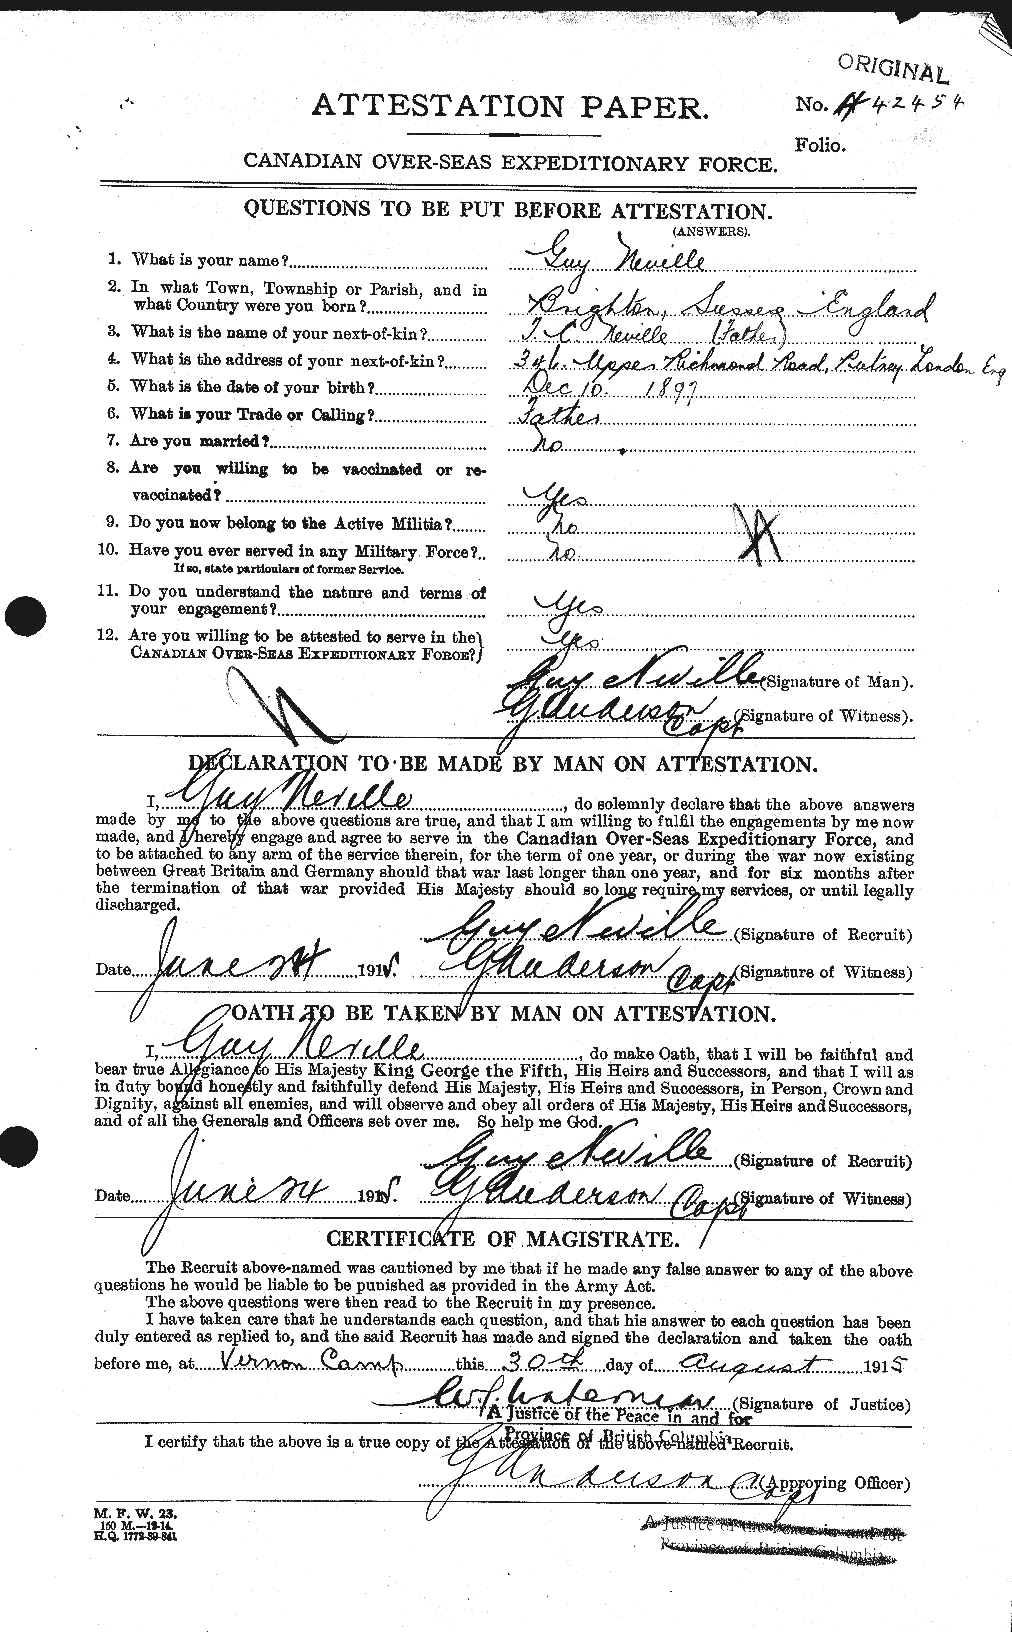 Personnel Records of the First World War - CEF 548876a